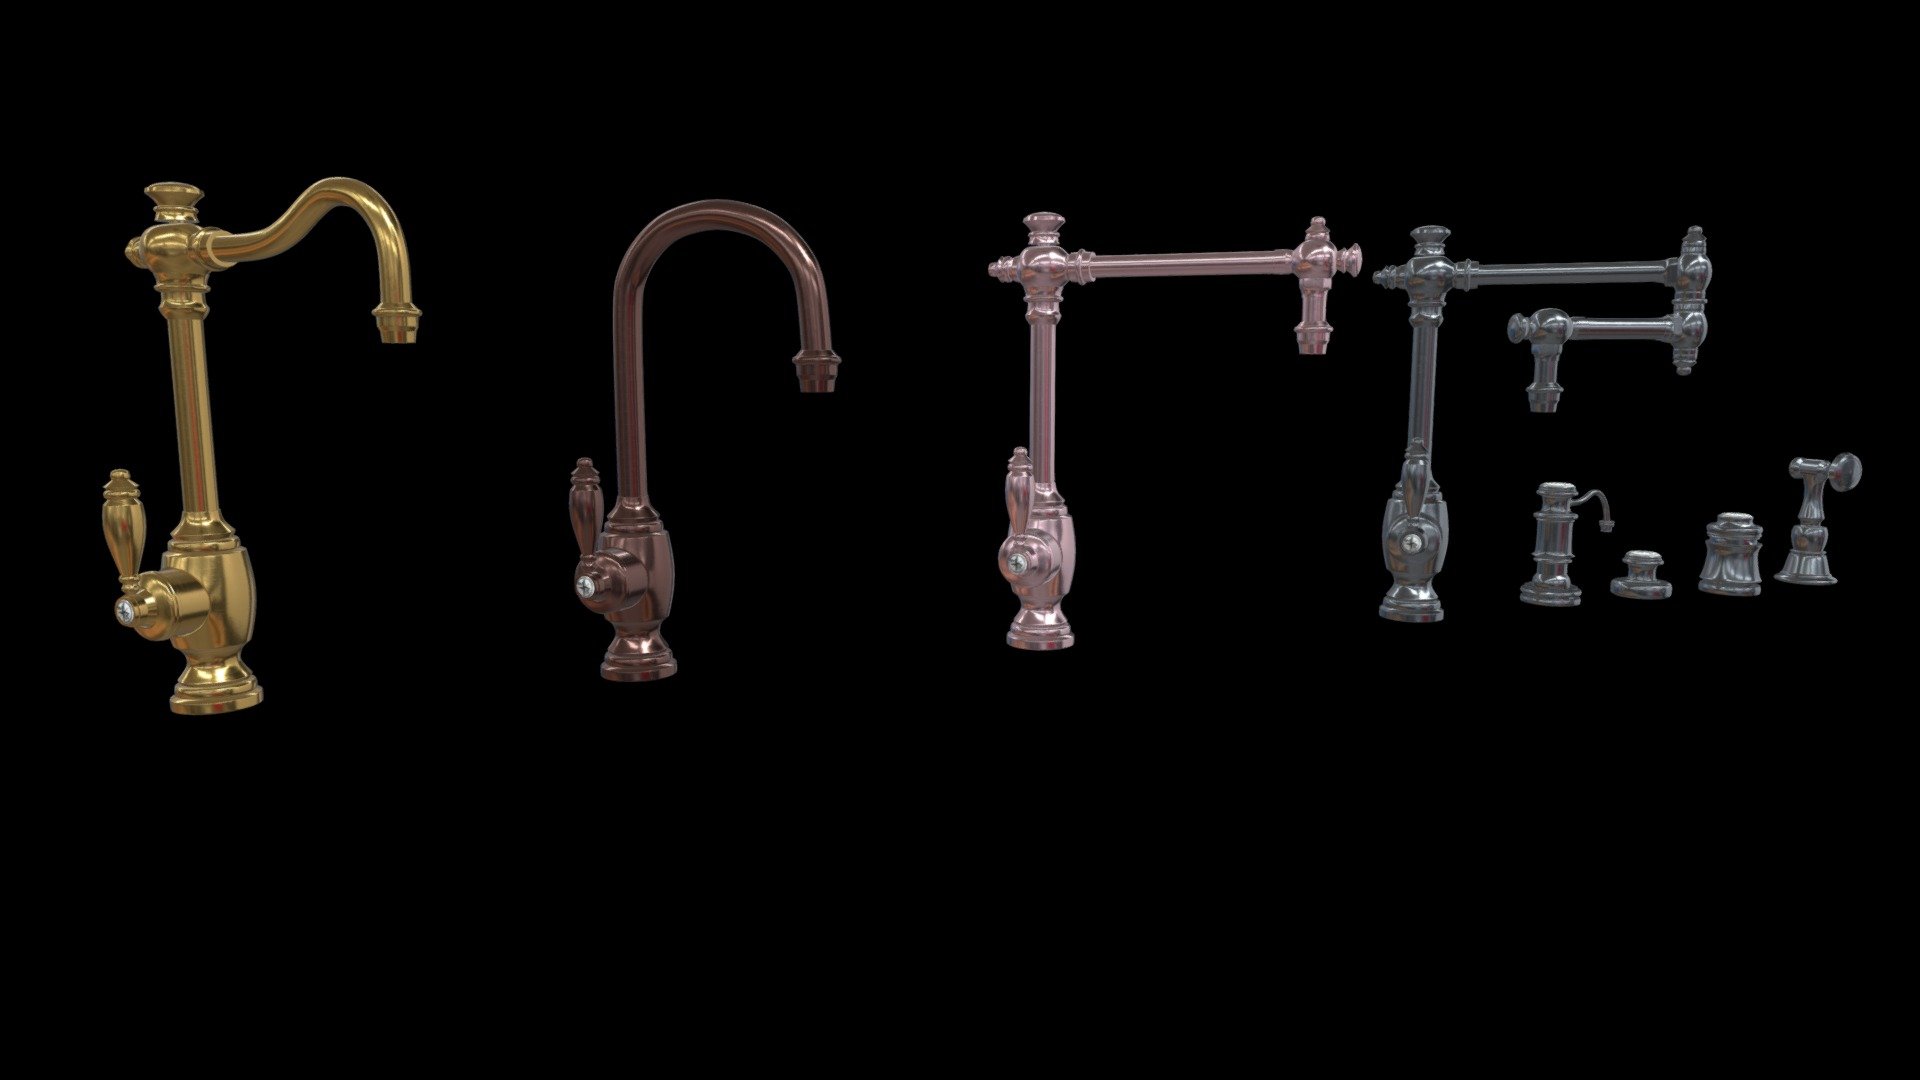 HI


WATERSTONE KITCHEN FAUCET SET
Download links : 

https://3dsky.org/users/miladh

different faucet 3d model

with 4 different materials

included:

&hellip; 3dsmax

&hellip; OBJ

&hellip; FBX

&hellip; high quality textures

Hope you like it.



Some Other Products :

100 Ancient Symbols (3D models, Zbrush brushes, alpha and normal textures) Ornament :

https://www.artstation.com/a/11729602

40 Hair Smart Material + Free Video tutorial :

https://www.artstation.com/a/7110681

Ultimate Wood Stencil 170 PNG :

https://www.artstation.com/a/8258662

70 Road Stencil Imperfection and painted signs

https://www.artstation.com/a/6948865

How to create fabric material in substance designer

https://www.artstation.com/a/5718338

10 High Quality Leather Smart Material

https://www.artstation.com/a/3162367 - WATERSTONE TOWSON FBX - 3D model by Rokviz 3d model